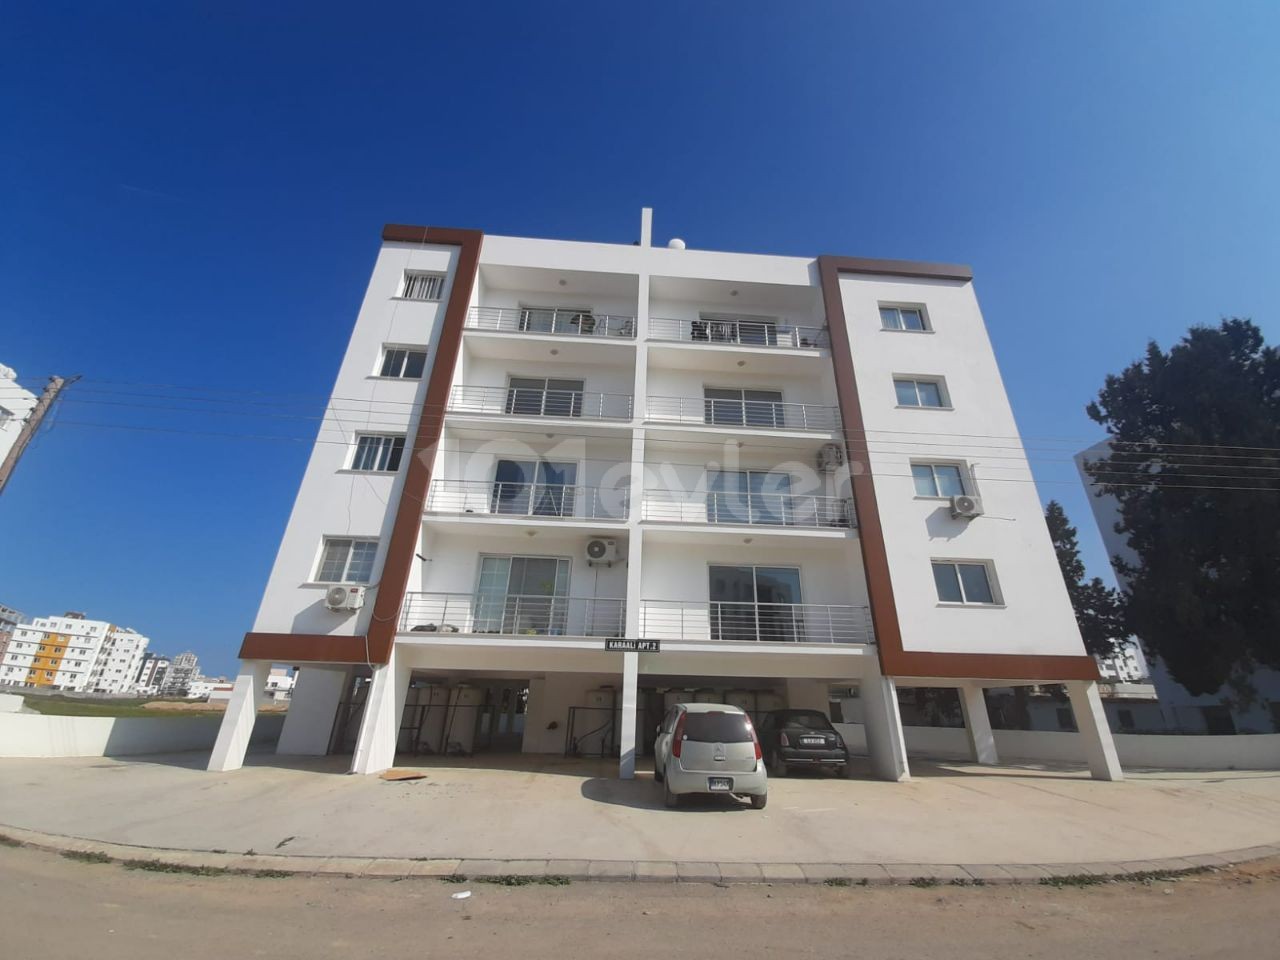 FOR RENT 2+1 APARTMENT 80 M2 FROM 8500 TL 6 MONTHS DEPOSIT + COMMISSION